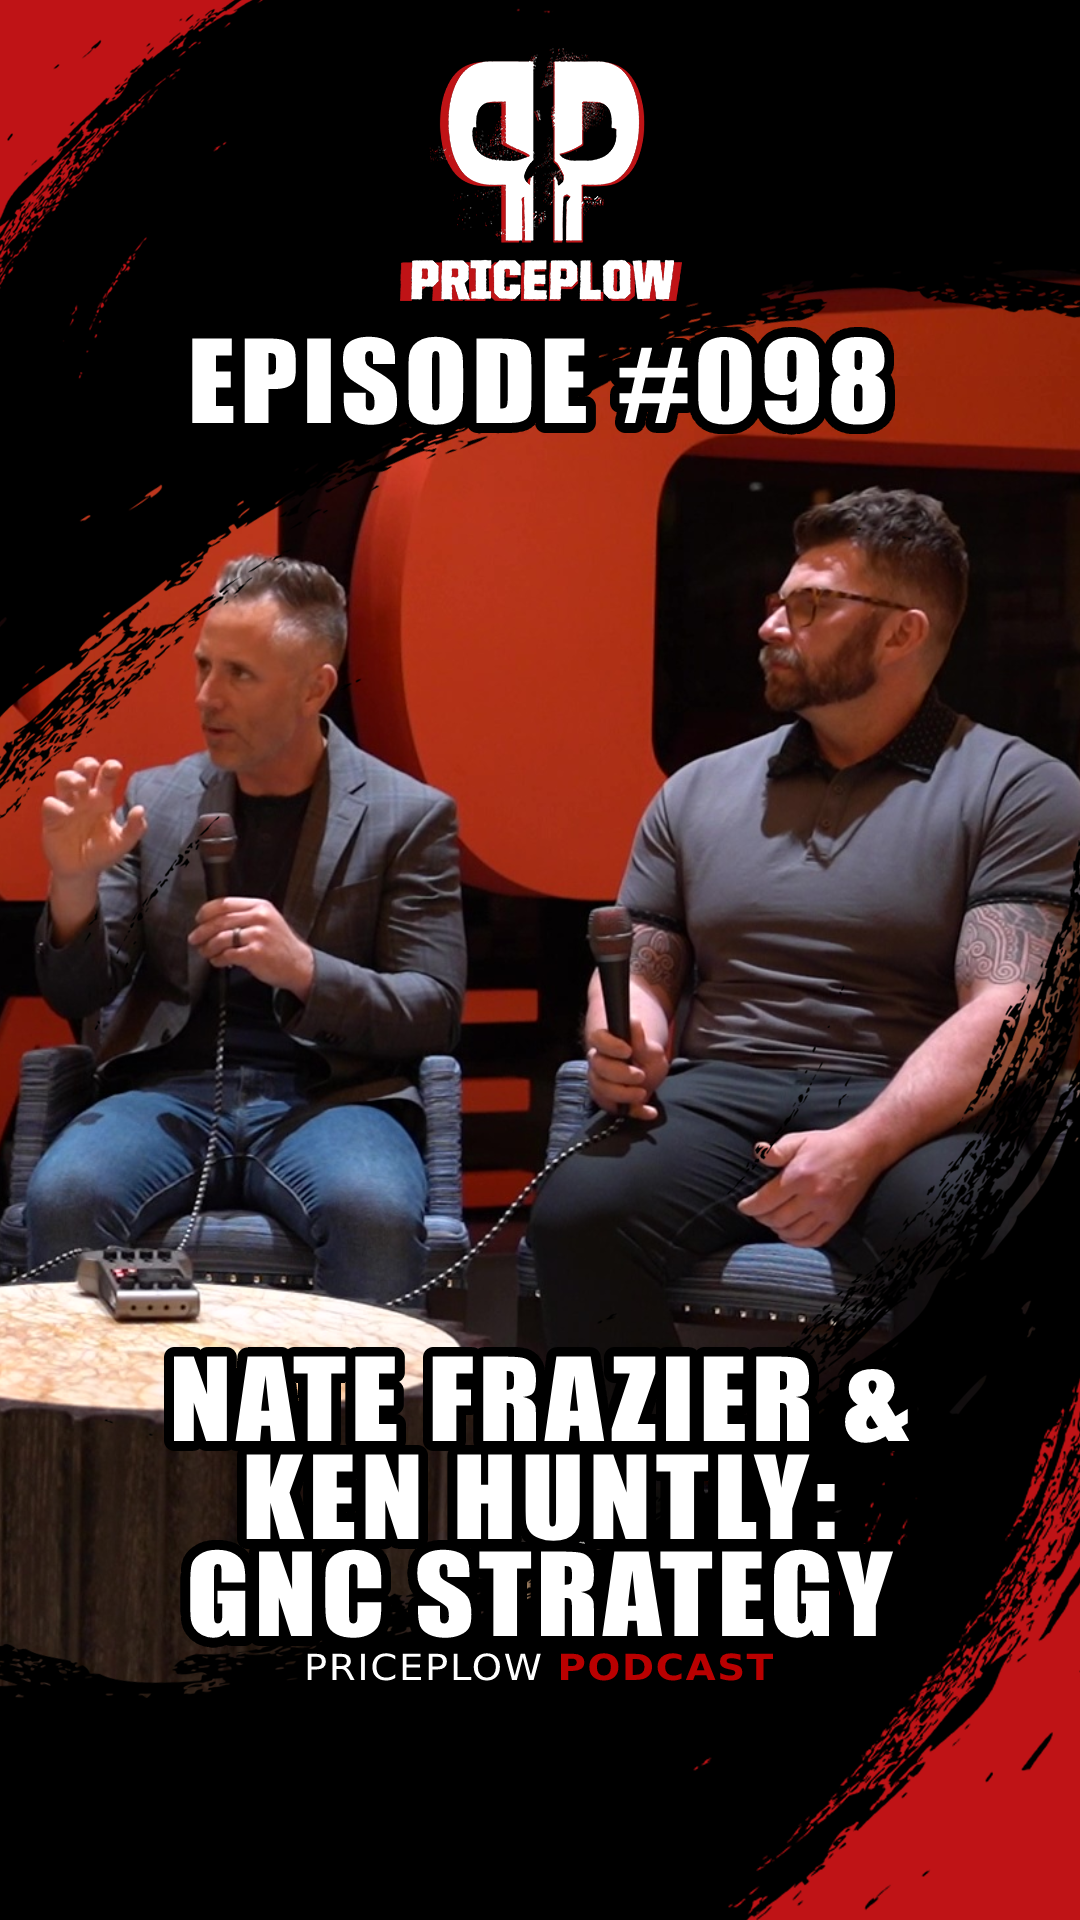 Nate Frazier & Ken Huntly of GNC on the PricePlow Podcast Episode #098